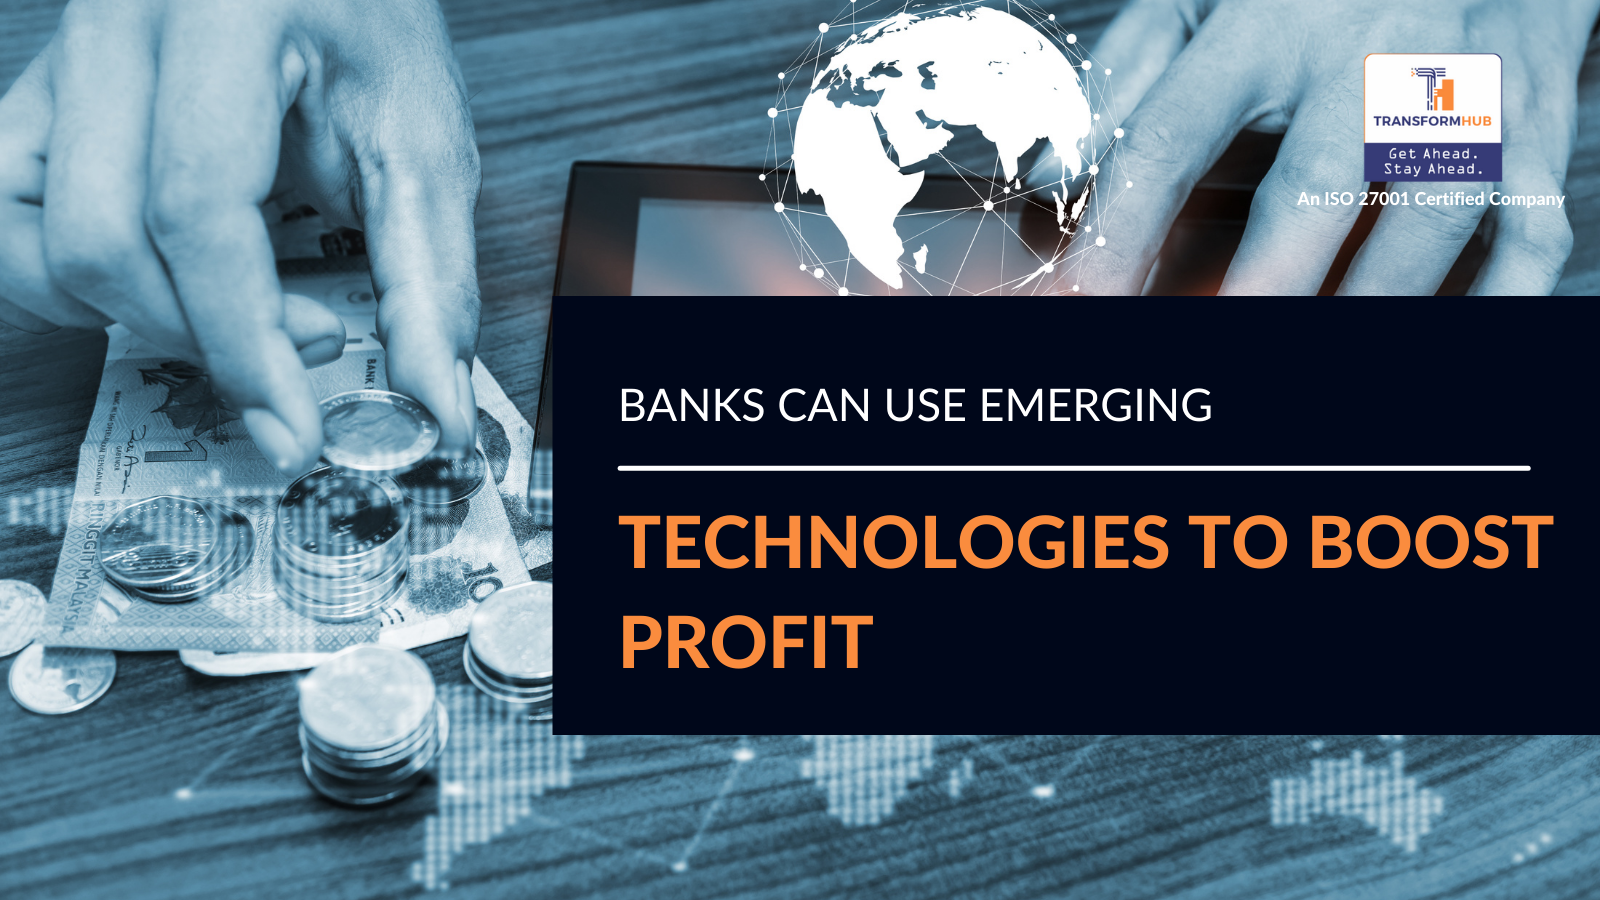 Banks%20can%20use%20emerging%20technologies%20to%20boost%20profits.png